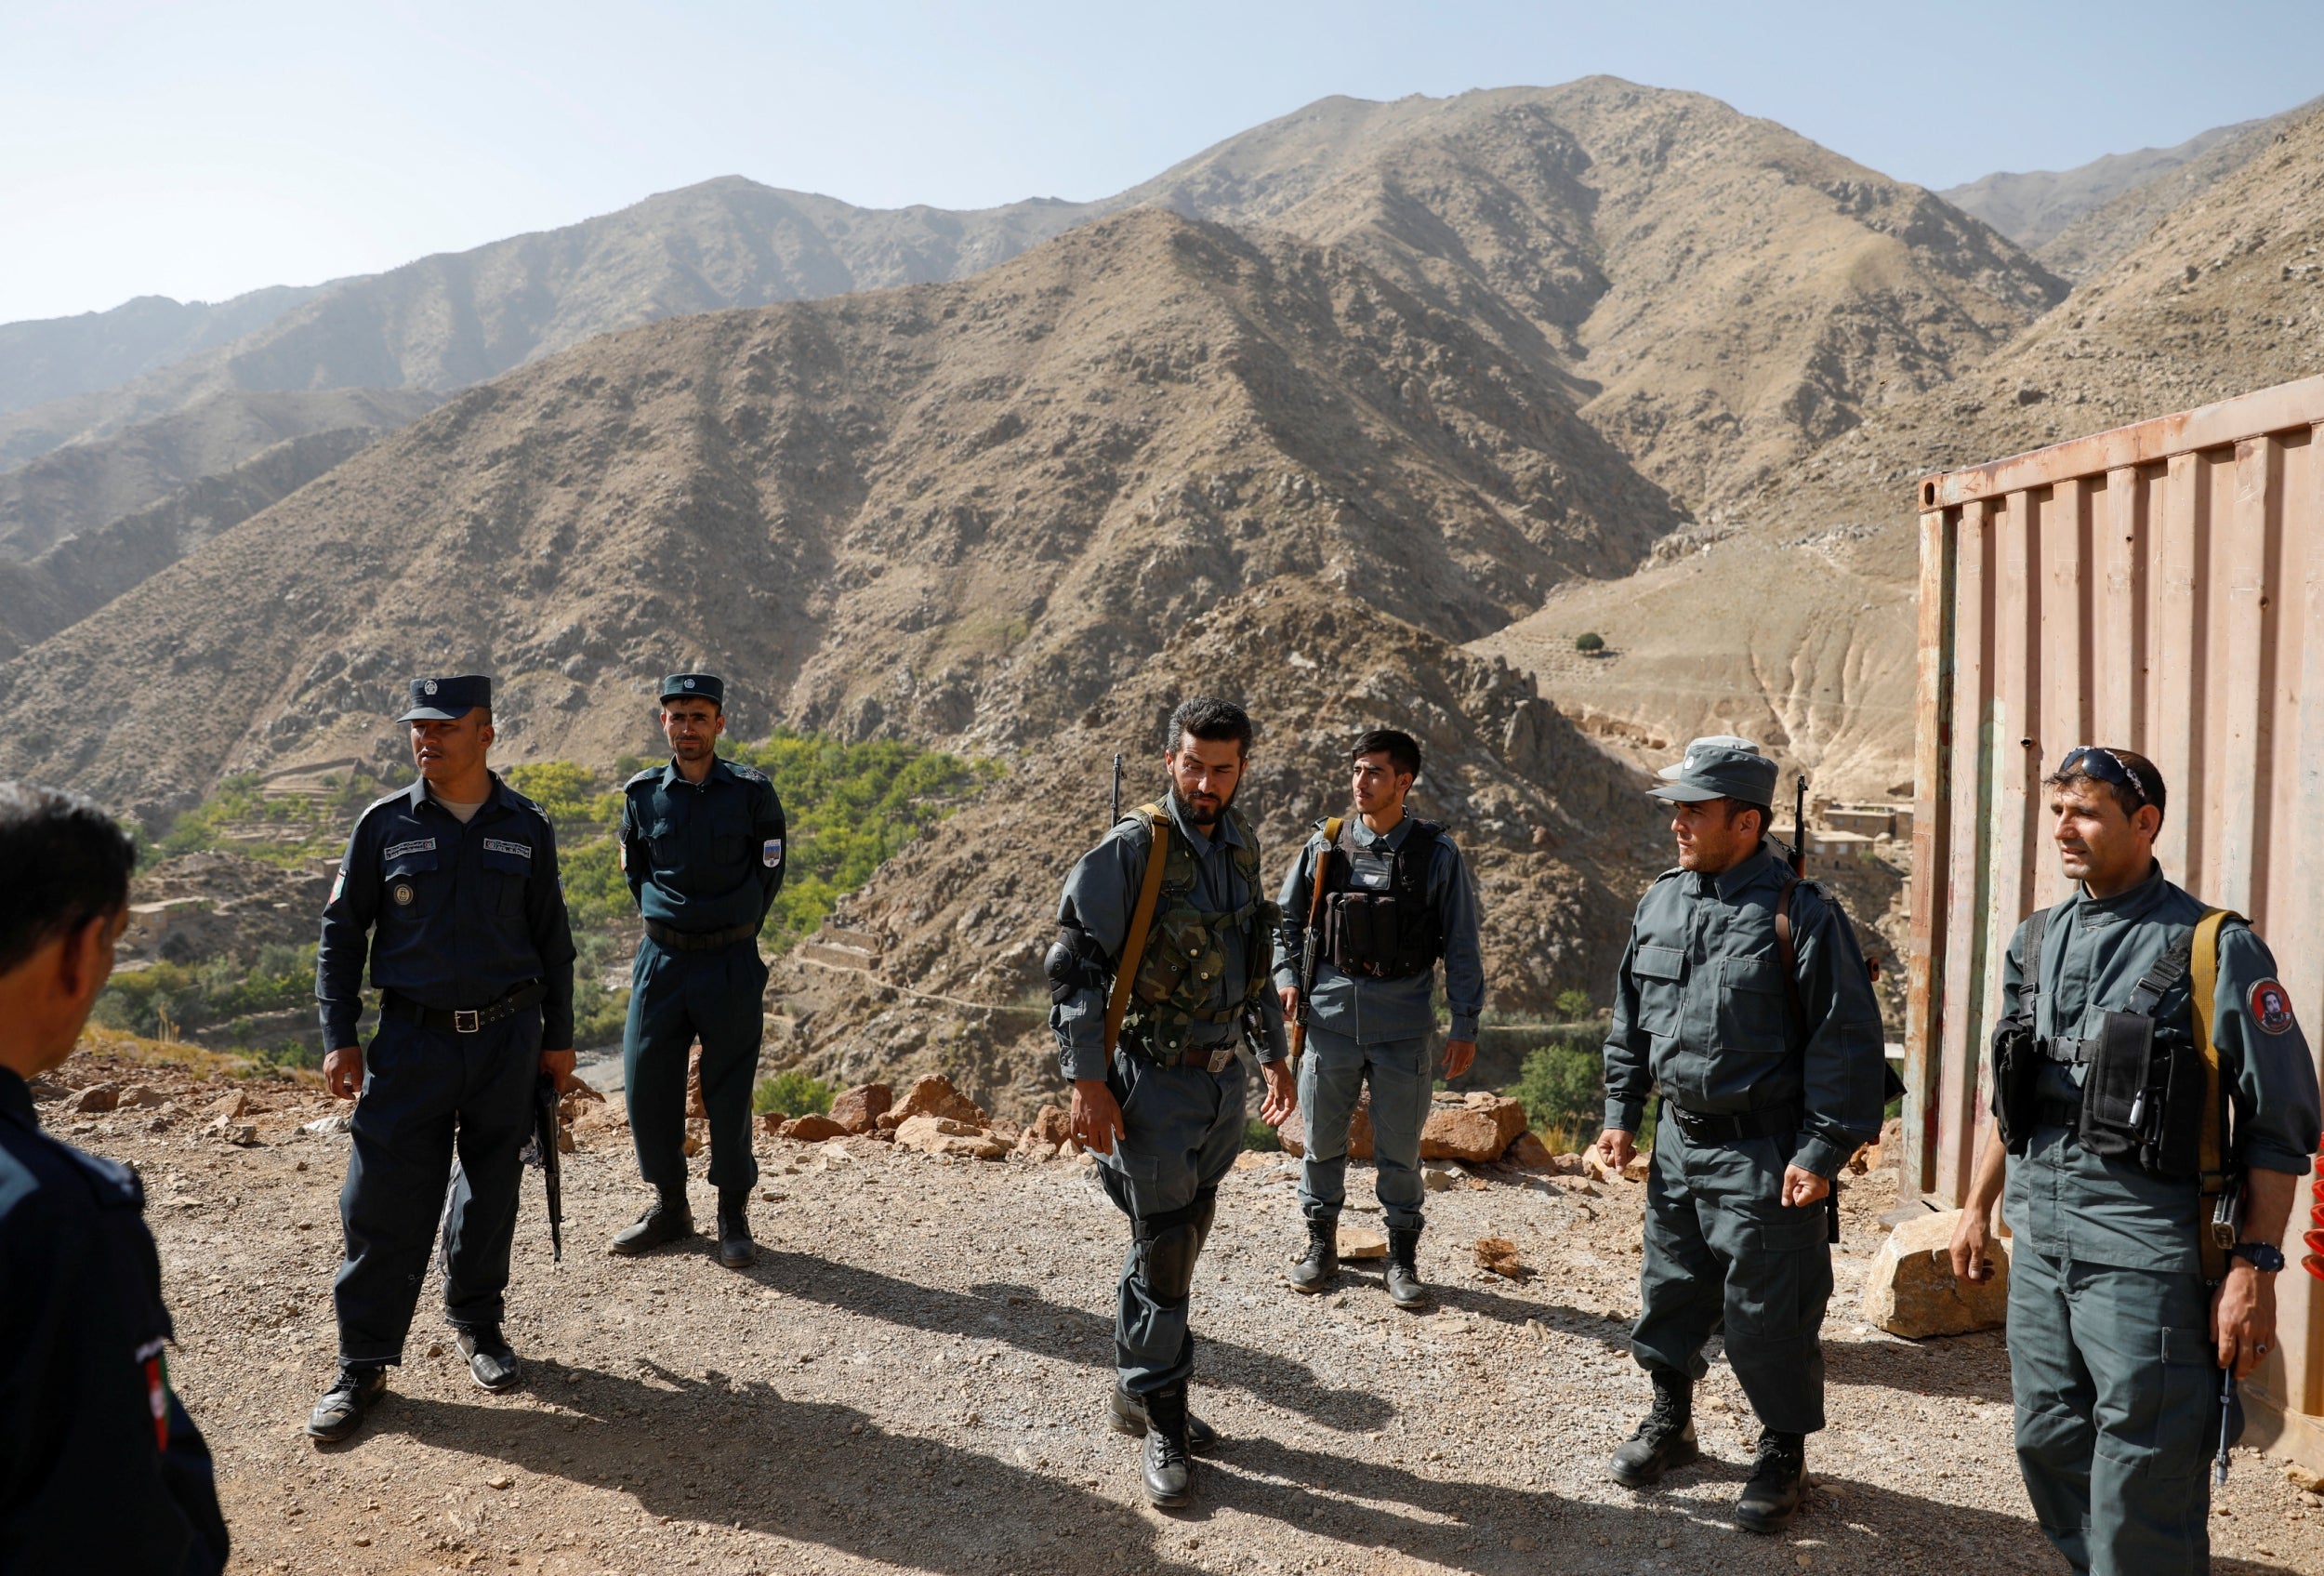 Afghan policemen keep watch as others carry election material to polling stations inaccessible by road, in Shutul, Panjshir province, on Friday